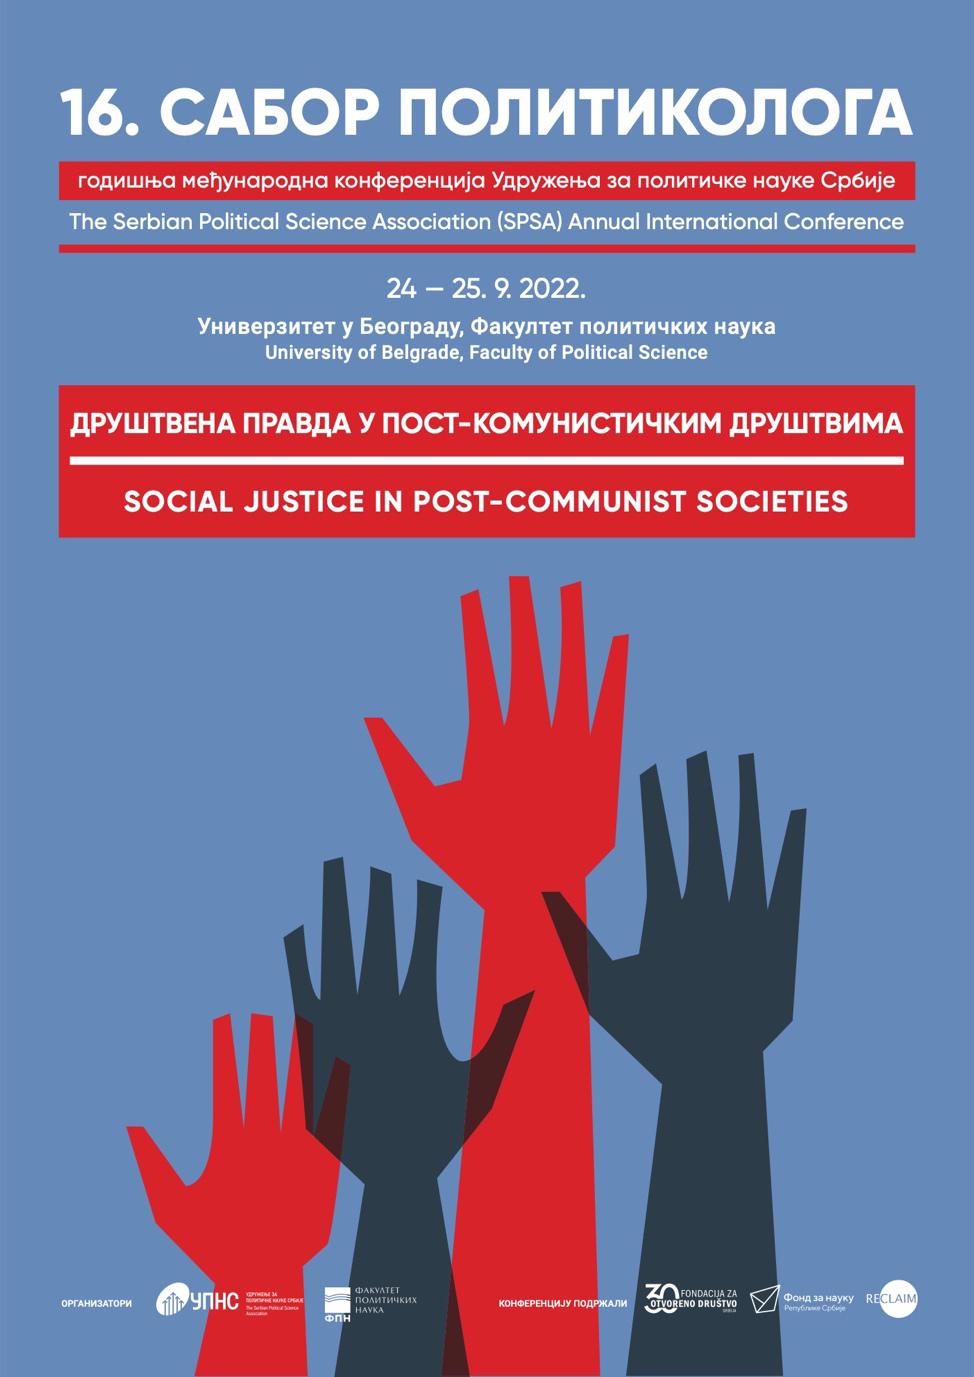 Serbian Political Science Association Annual Conference 2022 Social Justice in Post-Communist Societies